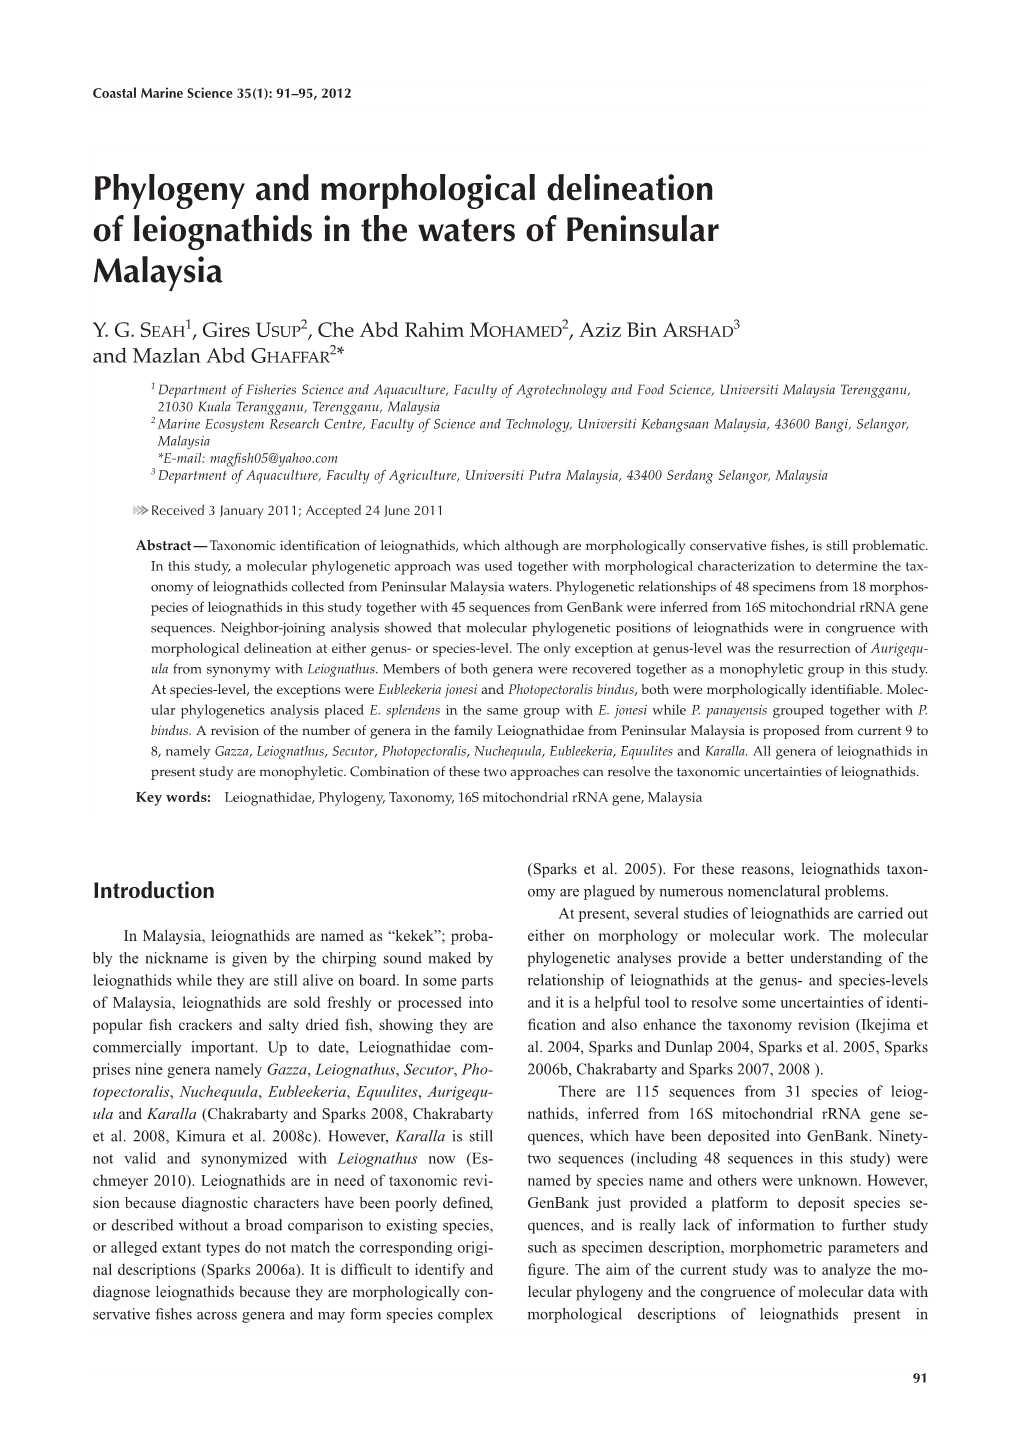 Phylogeny and Morphological Delineation of Leiognathids in the Waters of Peninsular Malaysia